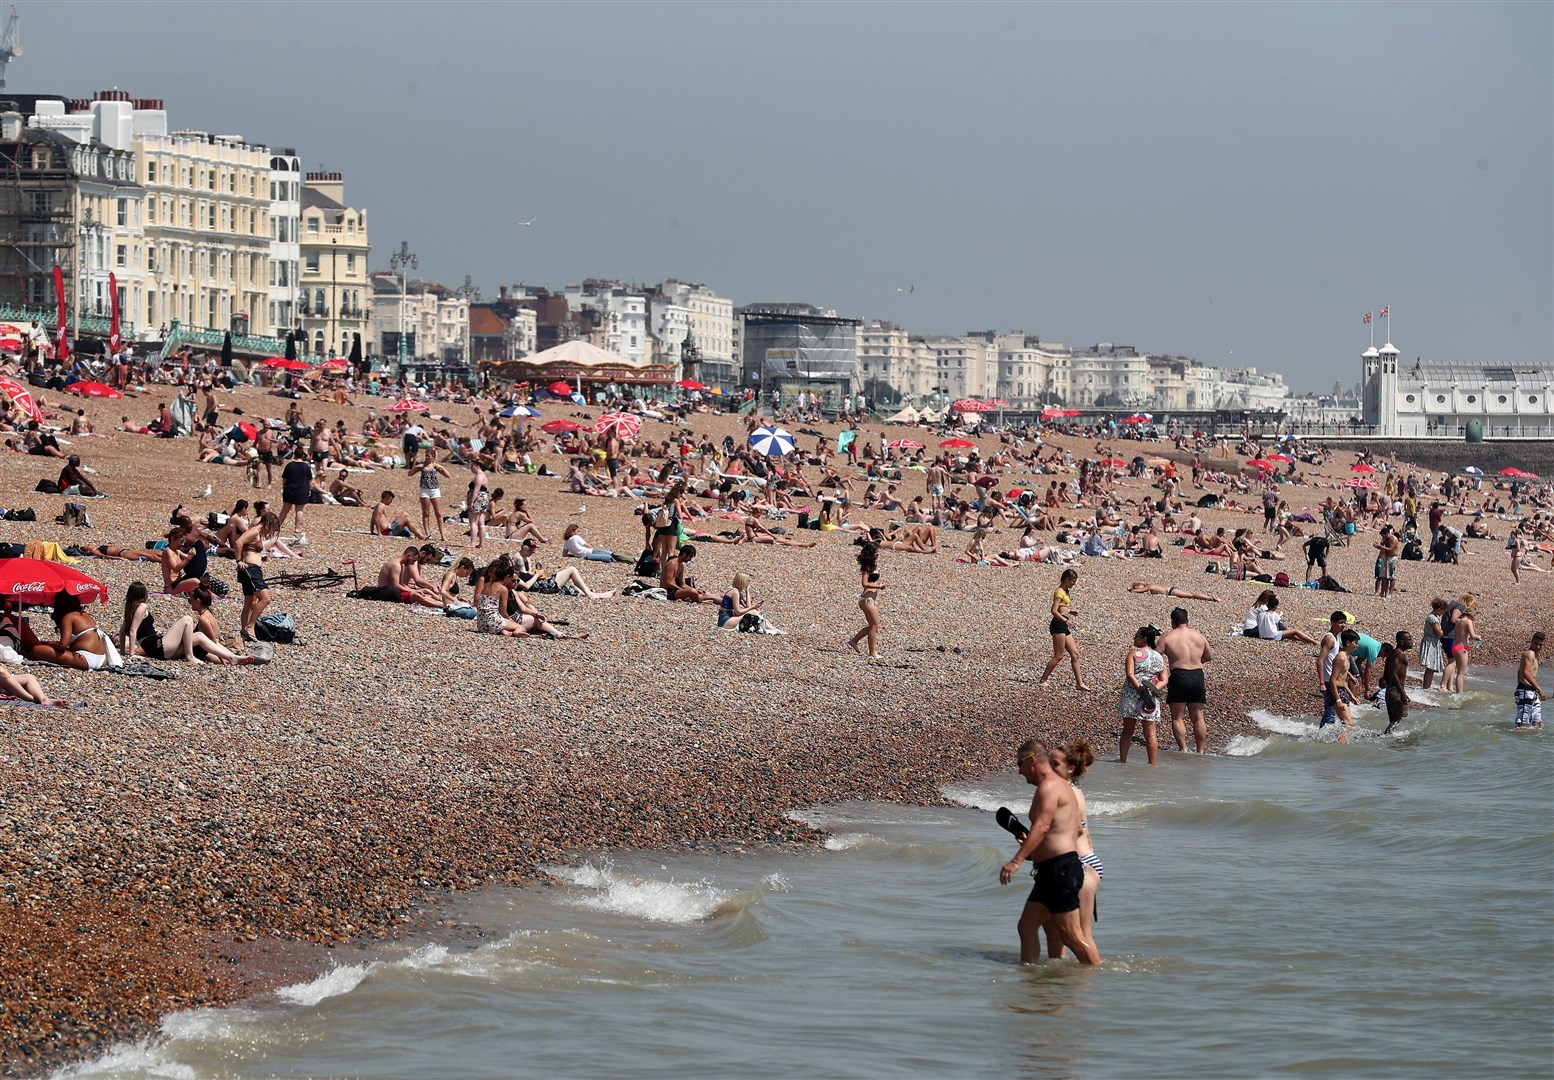 People will be heading to the beach as temperatures rise this week (PA)